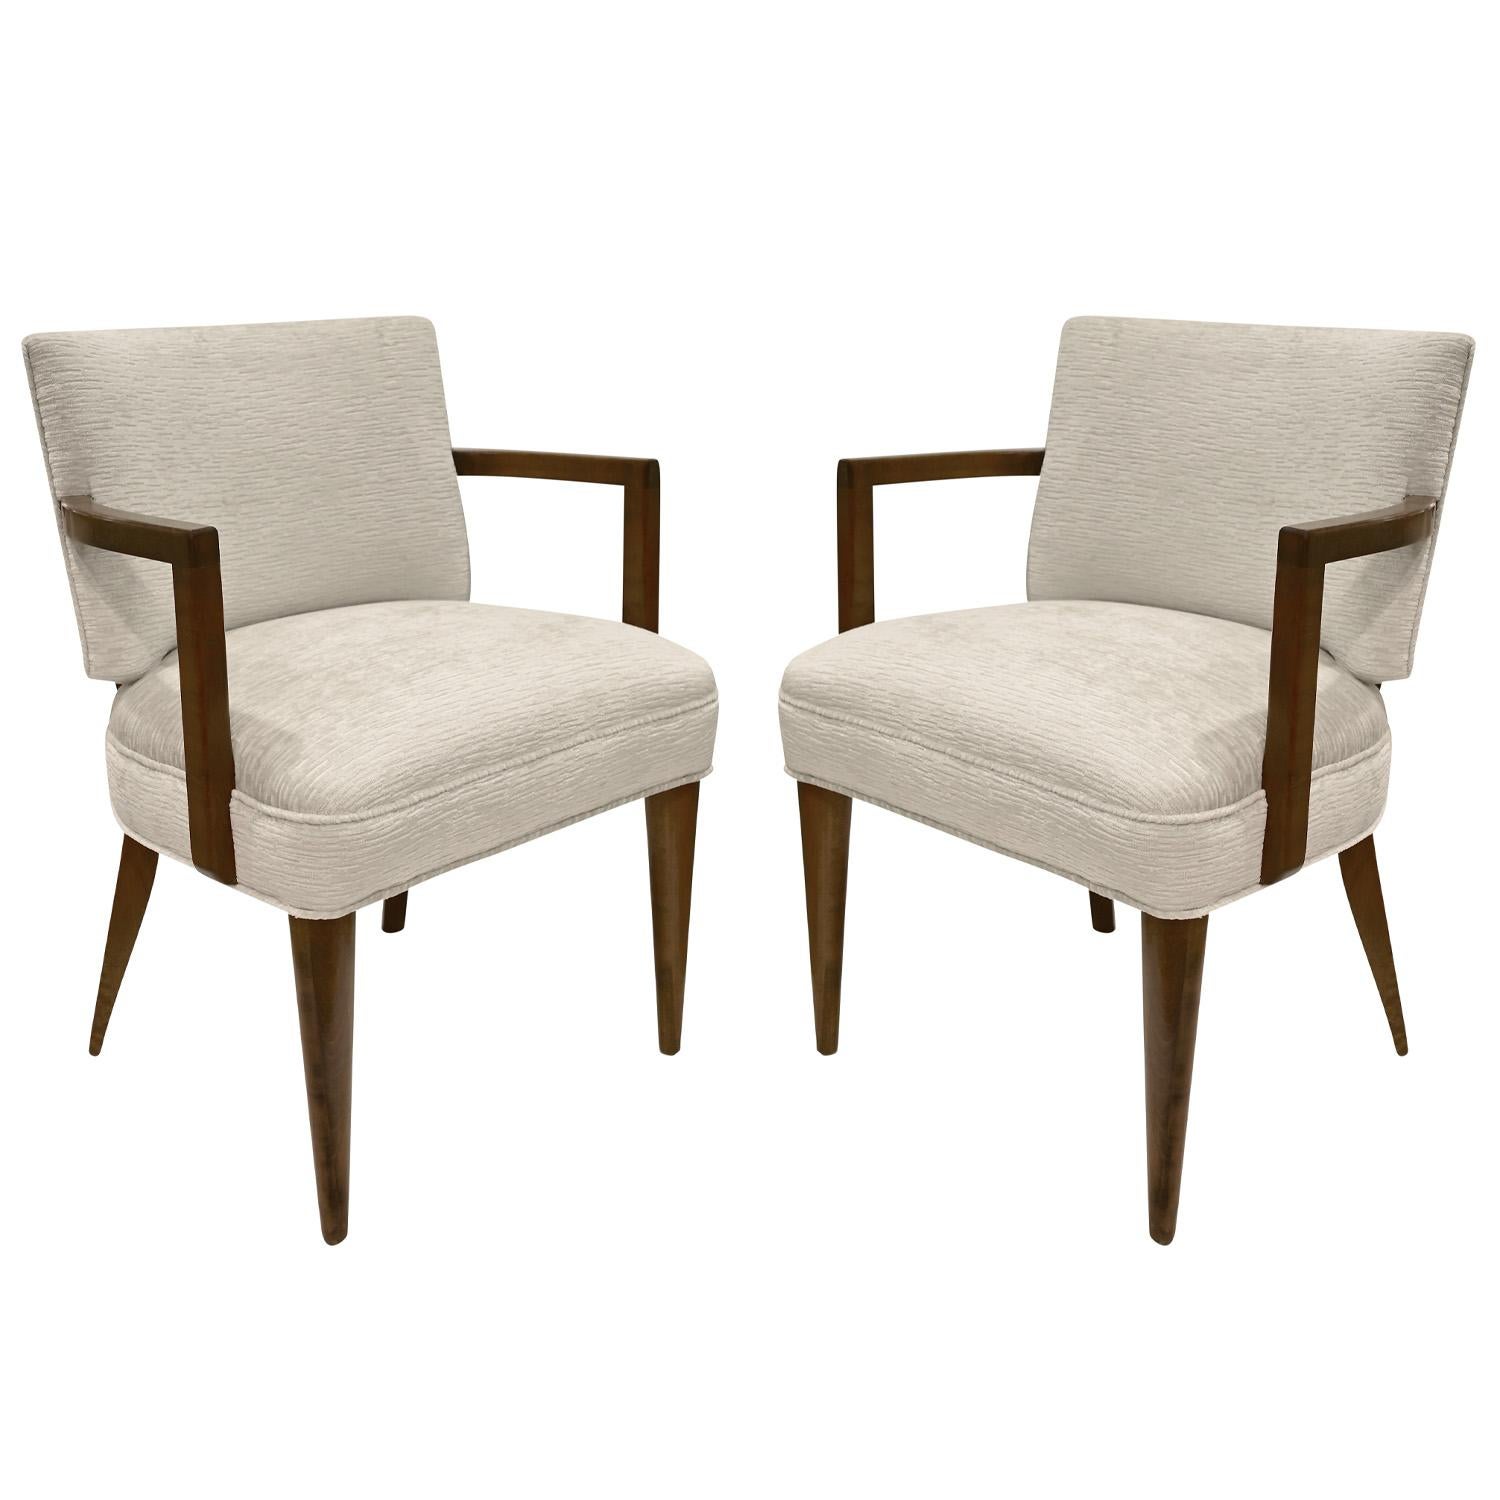 American Gilbert Rohde Elegant Set of 8 Newly Upholstered Dining Chairs, 1940s